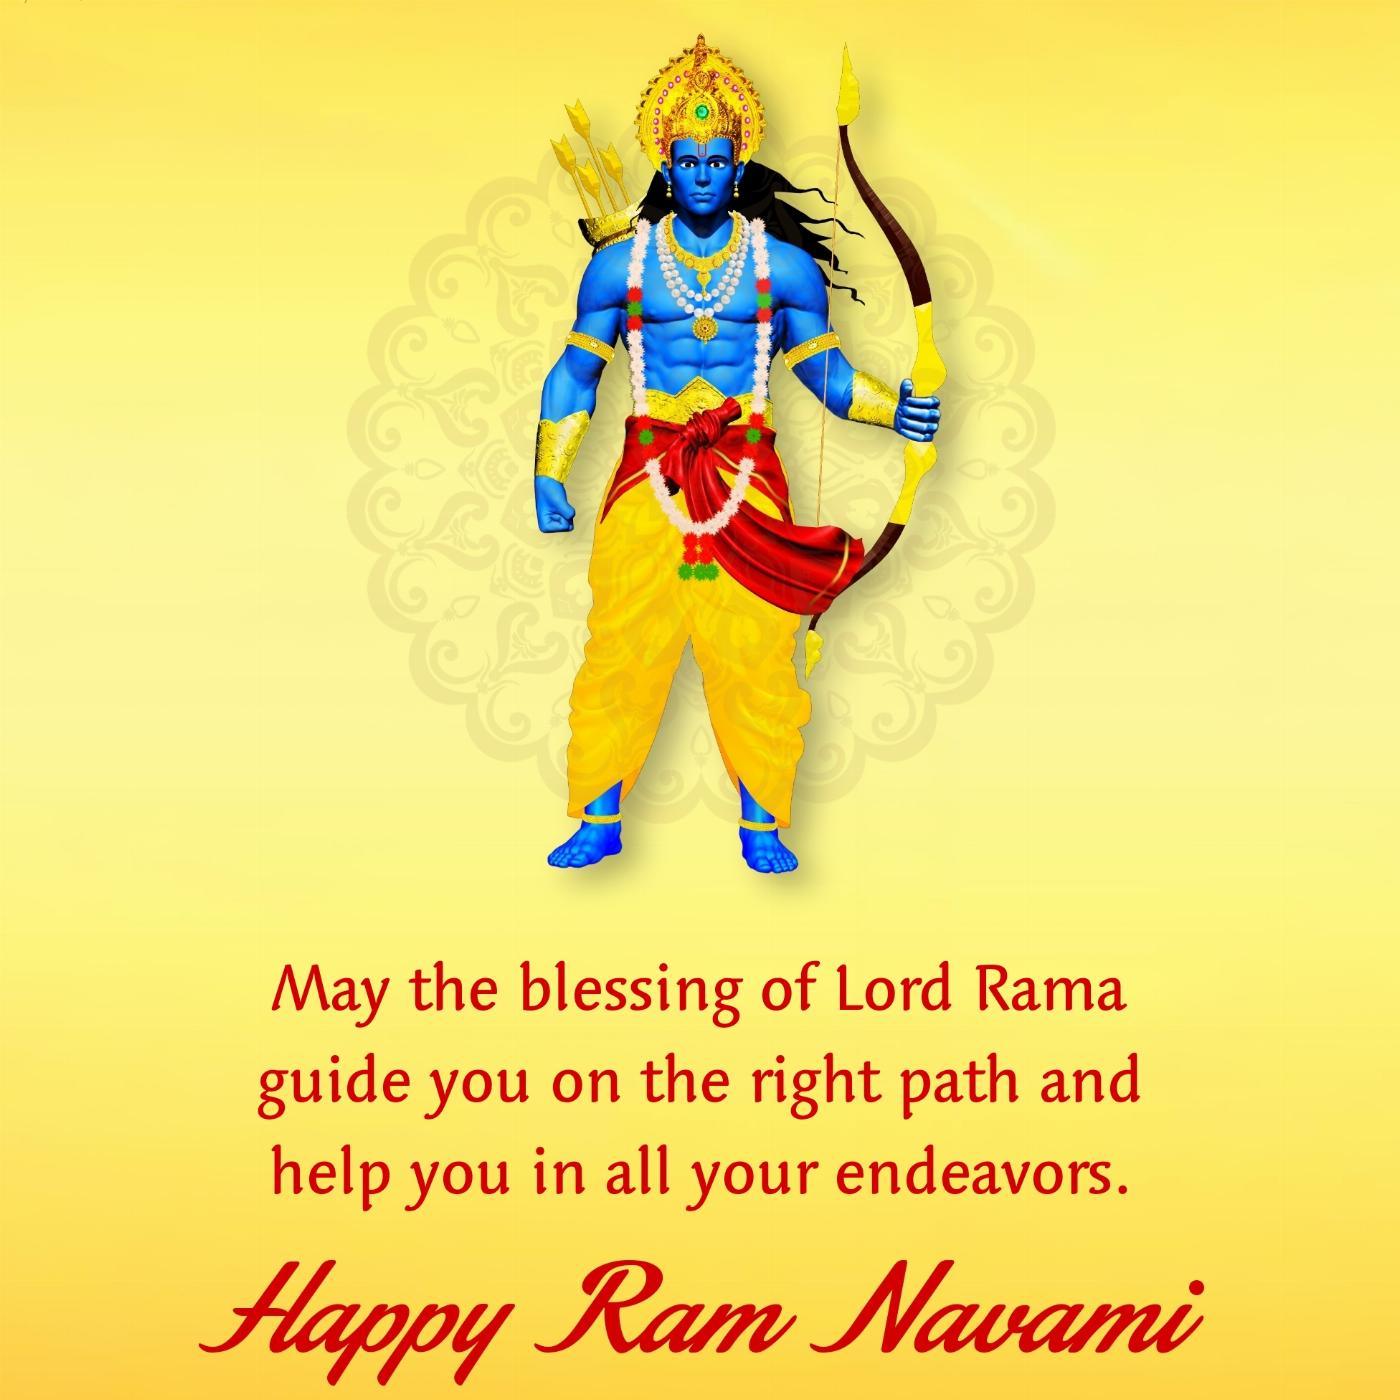 May the blessing of Lord Rama guide you on the right path